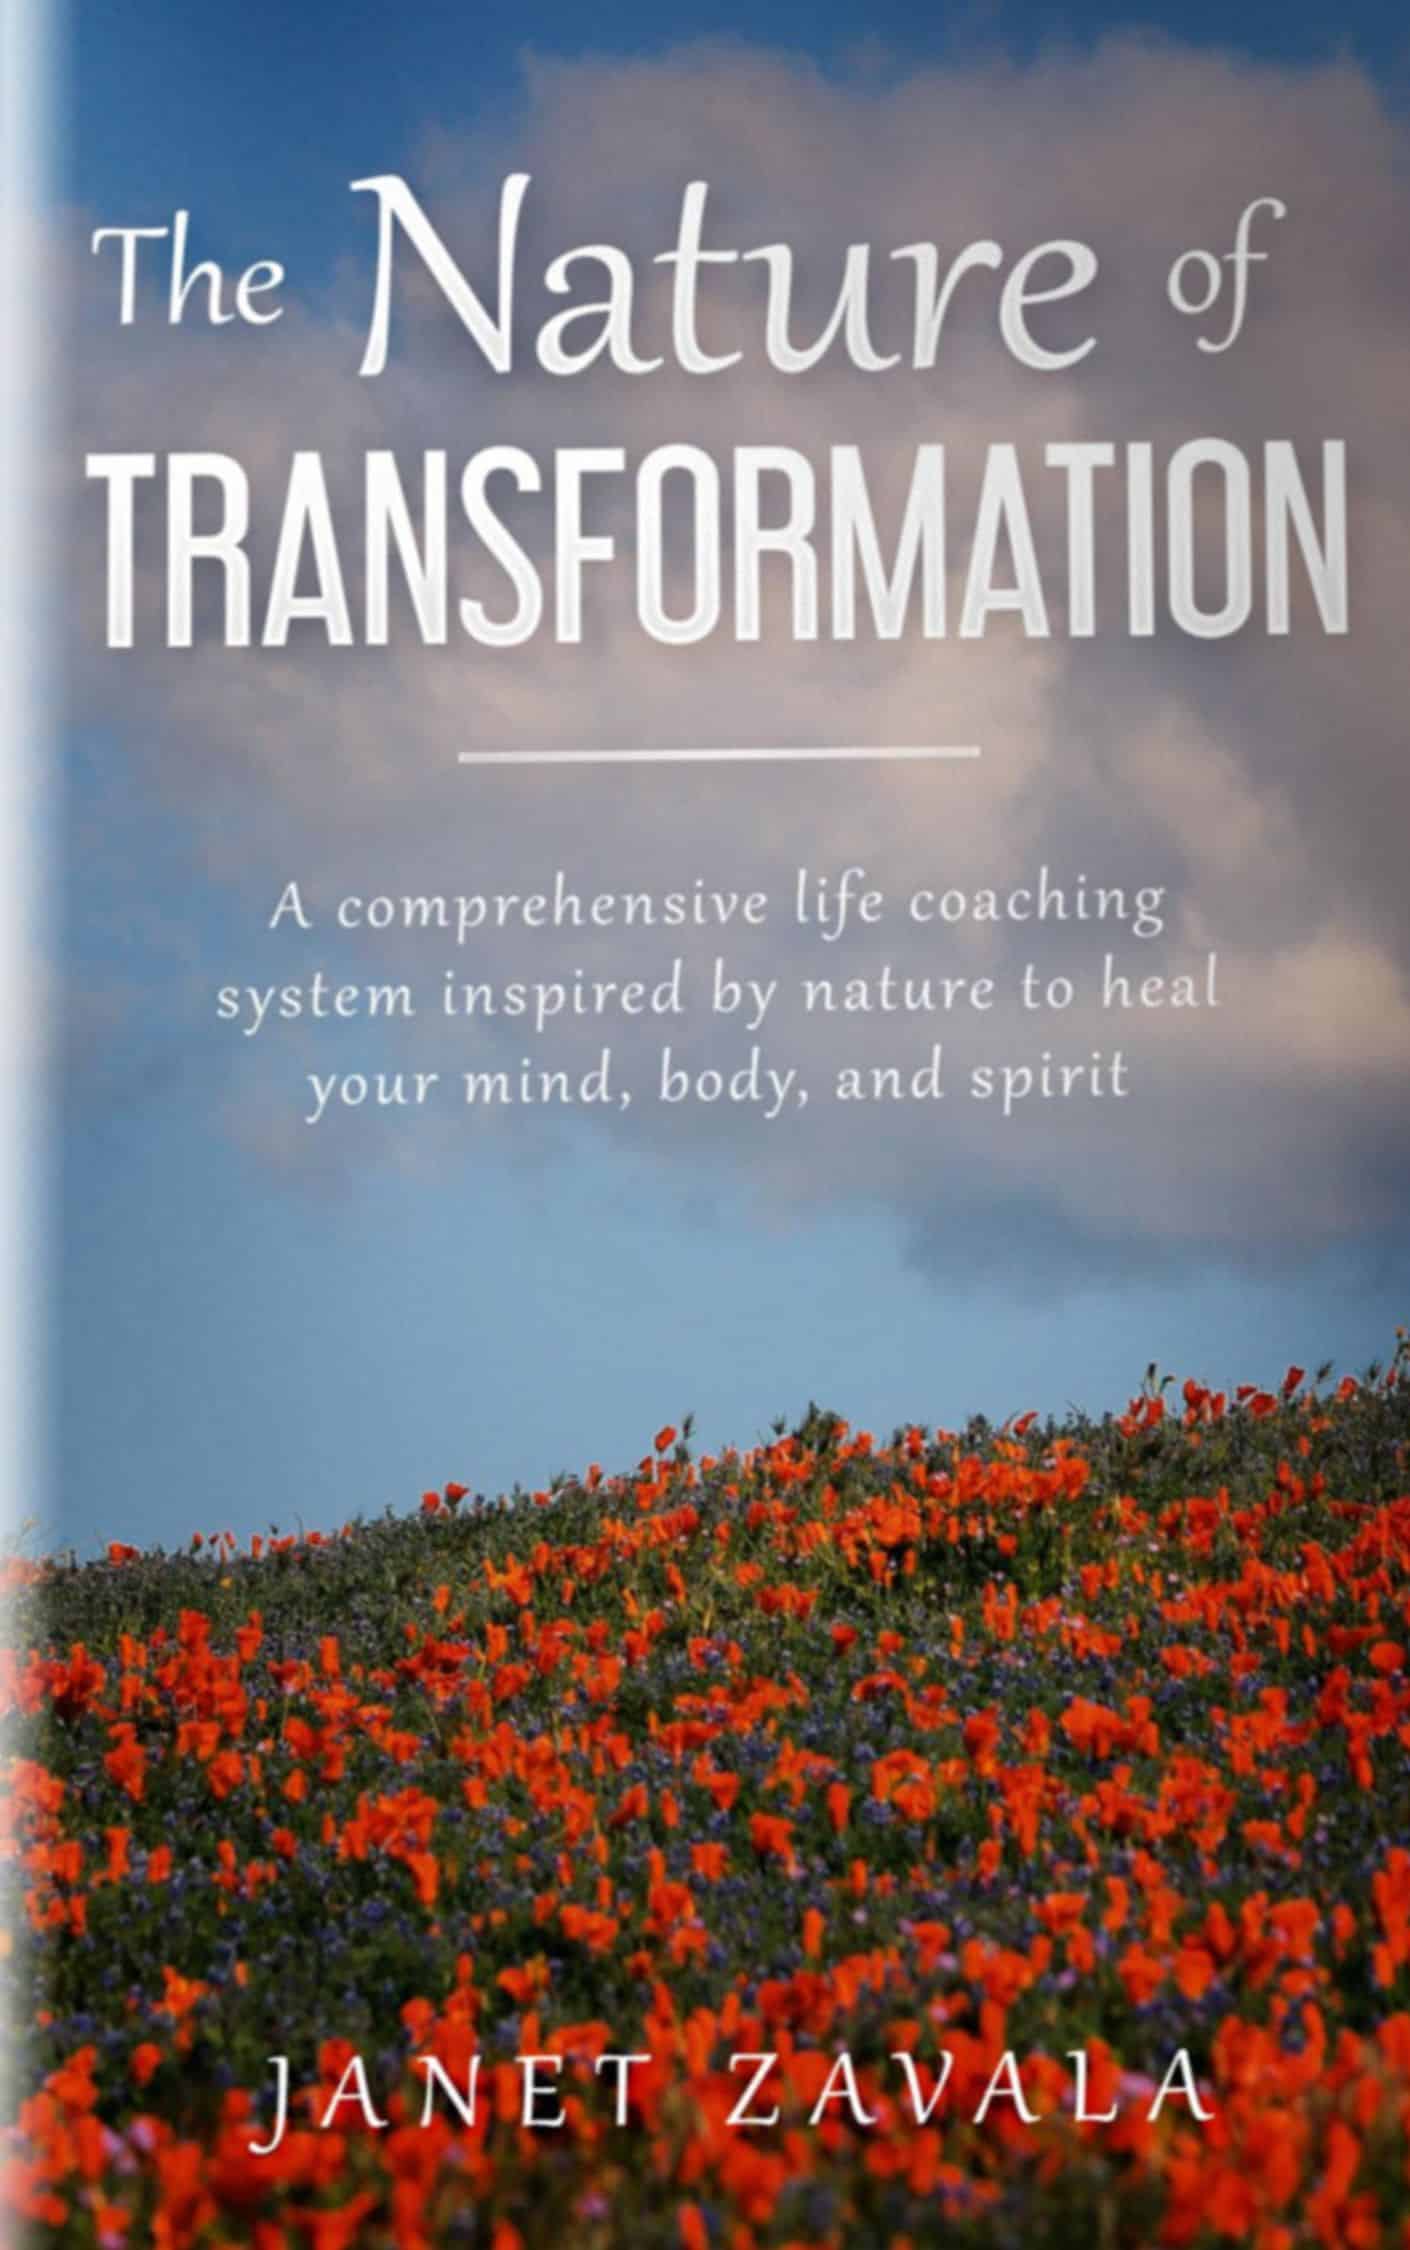 The Nature of Transformation